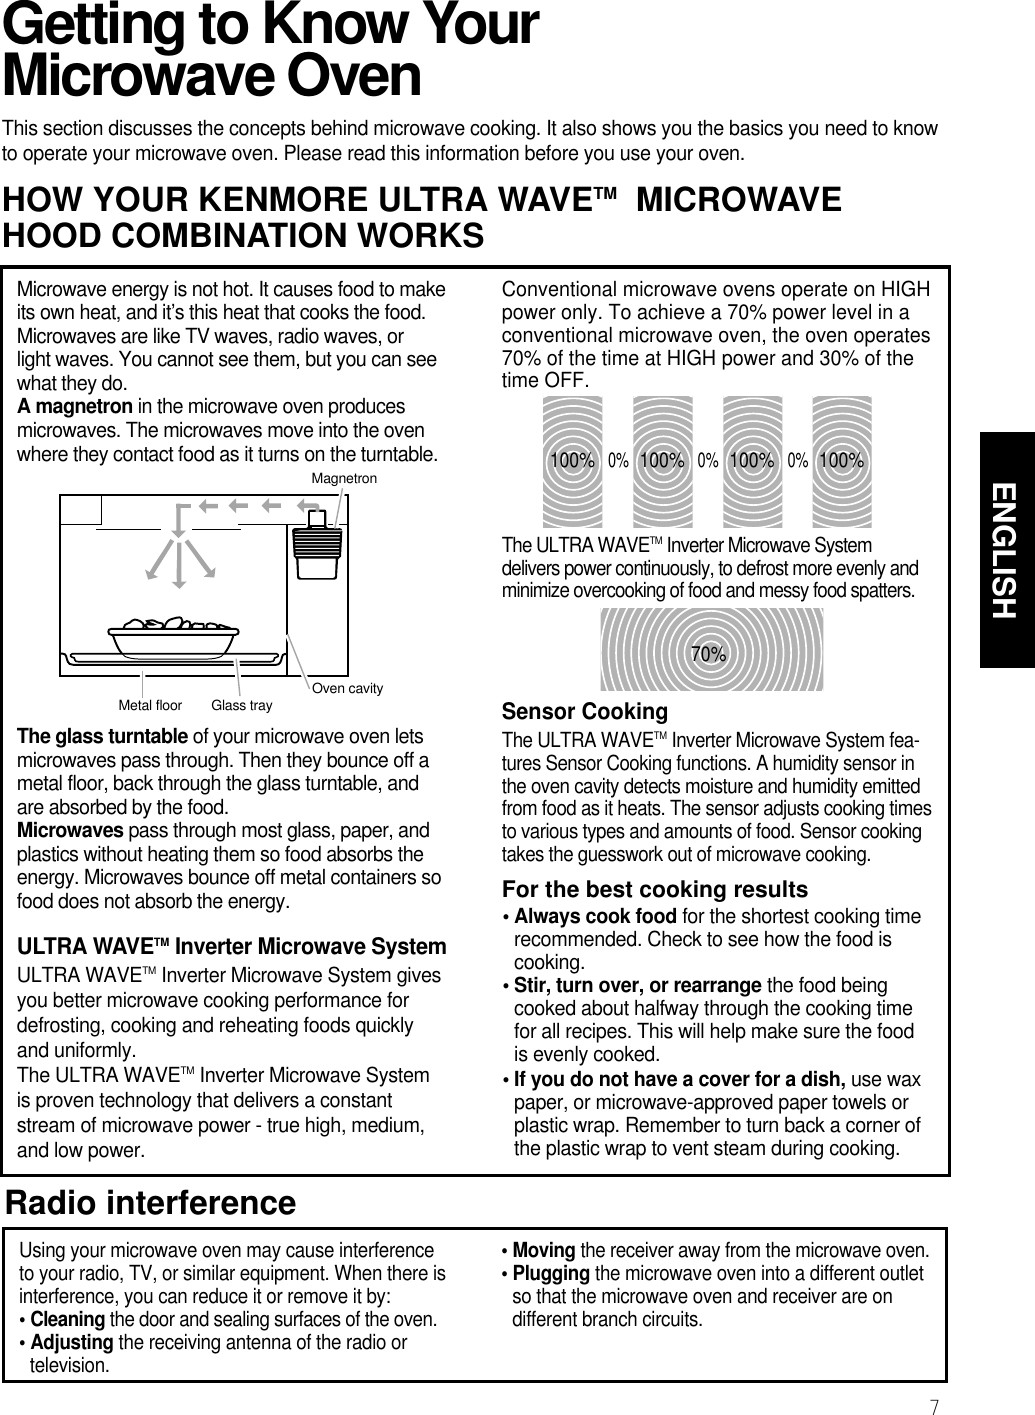 ENGLISH7Getting to Know YourMicrowave OvenThis section discusses the concepts behind microwave cooking. It also shows you the basics you need to knowto operate your microwave oven. Please read this information before you use your oven.HOW YOUR KENMORE ULTRA WAVETM MICROWAVEHOOD COMBINATION WORKSRadio interferenceUsing your microwave oven may cause interferenceto your radio, TV, or similar equipment. When there isinterference, you can reduce it or remove it by:• Cleaning the door and sealing surfaces of the oven.• Adjusting the receiving antenna of the radio ortelevision.• Moving the receiver away from the microwave oven.• Plugging the microwave oven into a different outletso that the microwave oven and receiver are ondifferent branch circuits.Microwave energy is not hot. It causes food to makeits own heat, and it’s this heat that cooks the food.Microwaves are like TV waves, radio waves, orlight waves. You cannot see them, but you can seewhat they do.A magnetron in the microwave oven producesmicrowaves. The microwaves move into the ovenwhere they contact food as it turns on the turntable.The glass turntable of your microwave oven letsmicrowaves pass through. Then they bounce off ametal floor, back through the glass turntable, andare absorbed by the food.Microwaves pass through most glass, paper, andplastics without heating them so food absorbs theenergy. Microwaves bounce off metal containers sofood does not absorb the energy.ULTRA WAVETMInverter Microwave SystemULTRA WAVETM Inverter Microwave System givesyou better microwave cooking performance fordefrosting, cooking and reheating foods quicklyand uniformly.The ULTRA WAVETM Inverter Microwave Systemis proven technology that delivers a constantstream of microwave power - true high, medium,and low power.Conventional microwave ovens operate on HIGHpower only. To achieve a 70% power level in aconventional microwave oven, the oven operates70% of the time at HIGH power and 30% of thetime OFF.The ULTRA WAVETM Inverter Microwave Systemdelivers power continuously, to defrost more evenly andminimize overcooking of food and messy food spatters.Sensor CookingThe ULTRA WAVETM Inverter Microwave System fea-tures Sensor Cooking functions. A humidity sensor inthe oven cavity detects moisture and humidity emittedfrom food as it heats. The sensor adjusts cooking timesto various types and amounts of food. Sensor cookingtakes the guesswork out of microwave cooking.For the best cooking resultsMagnetronMetal floor Glass tray Oven cavity100% 100%0% 0%100% 100%0%70%• Always cook food for the shortest cooking timerecommended. Check to see how the food iscooking. • Stir, turn over, or rearrange the food beingcooked about halfway through the cooking timefor all recipes. This will help make sure the foodis evenly cooked. • If you do not have a cover for a dish, use waxpaper, or microwave-approved paper towels orplastic wrap. Remember to turn back a corner ofthe plastic wrap to vent steam during cooking.